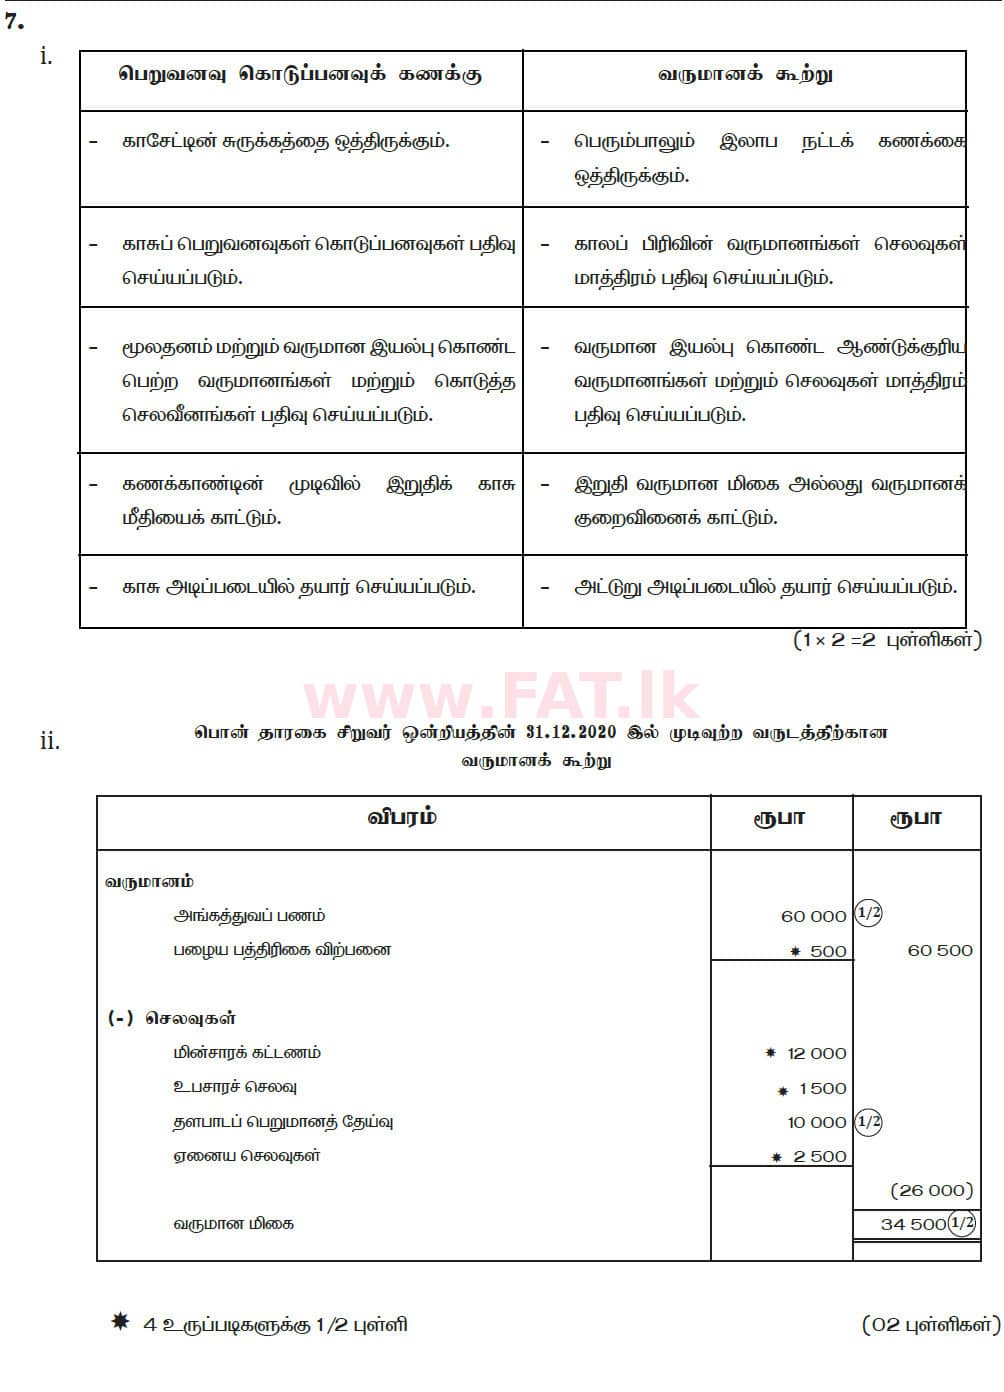 National Syllabus : Ordinary Level (O/L) Business and Accounting Studies - 2020 March - Paper II (தமிழ் Medium) 7 5788